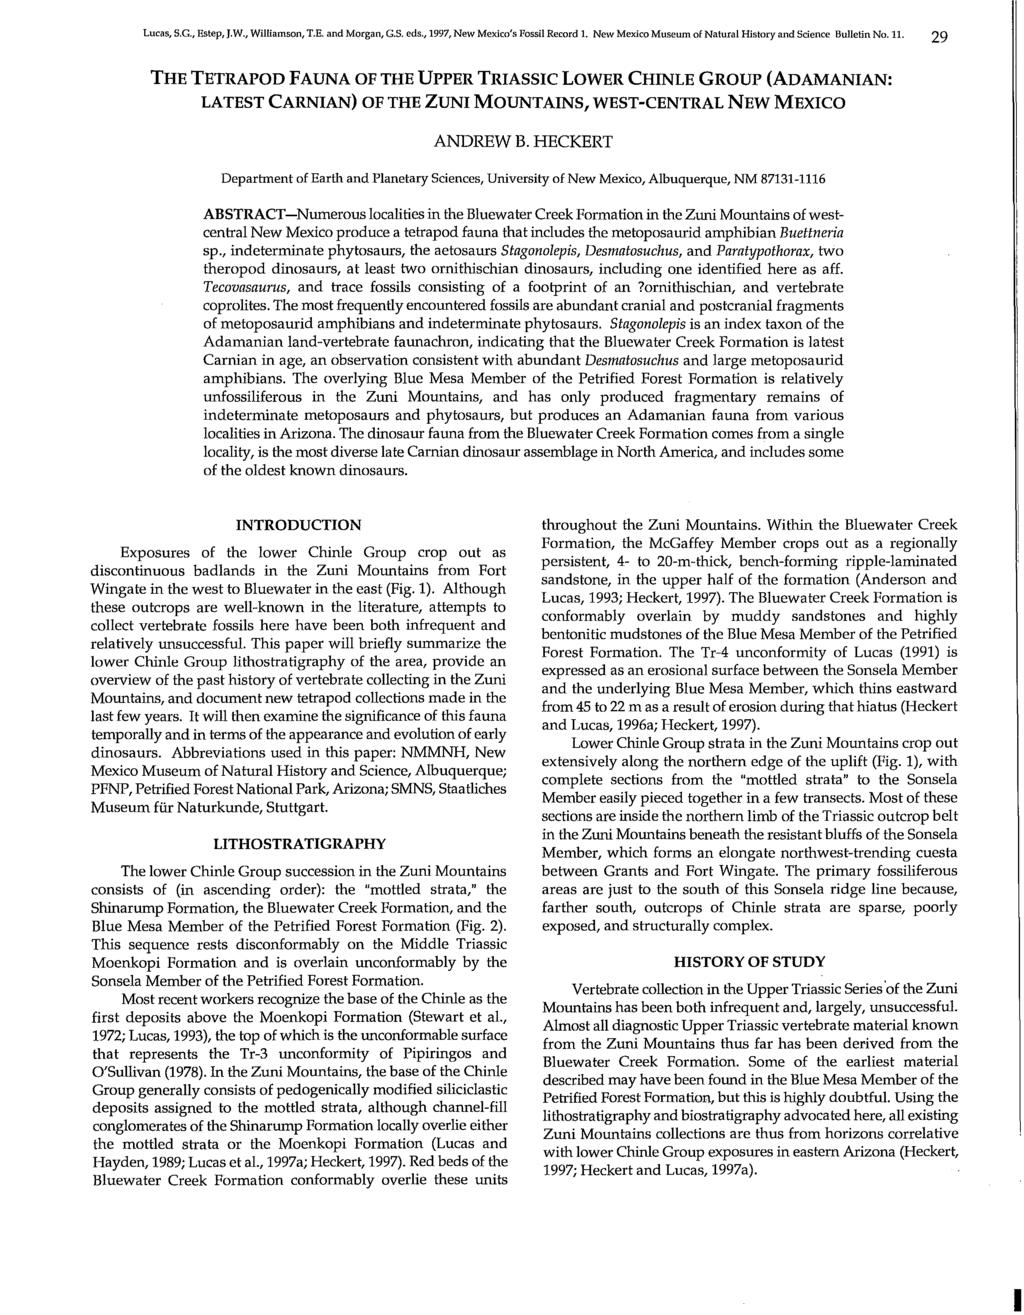 I Lucas~ S.G., Estep, }.W., Williamson/ T.E. and Morgan, G.S. eds., 1997, New Mexico's Fossil Record 1. New Mexico Museum of Natural History and Science Bulletin No. 11.